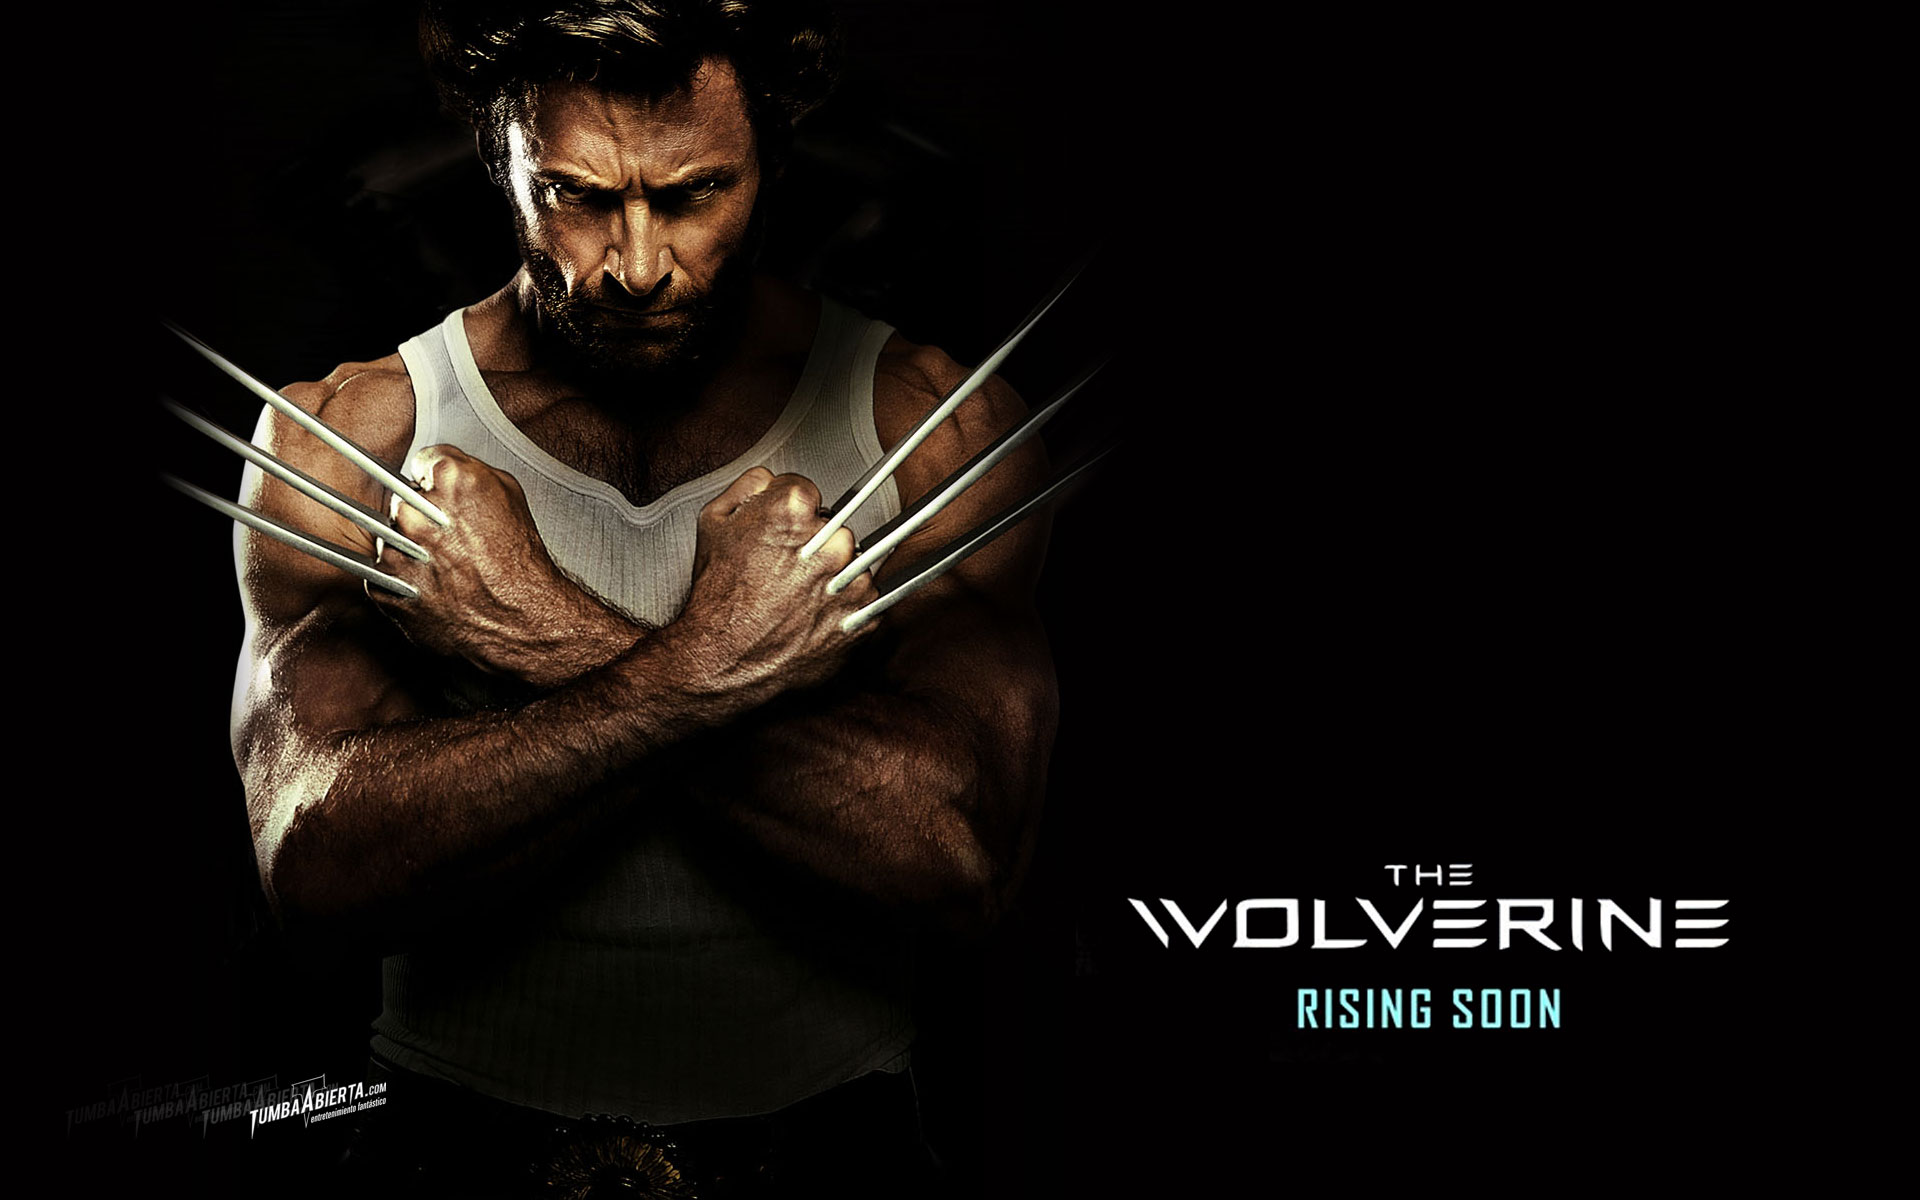 The Wolverine Full HD Wallpaper Is High Definition